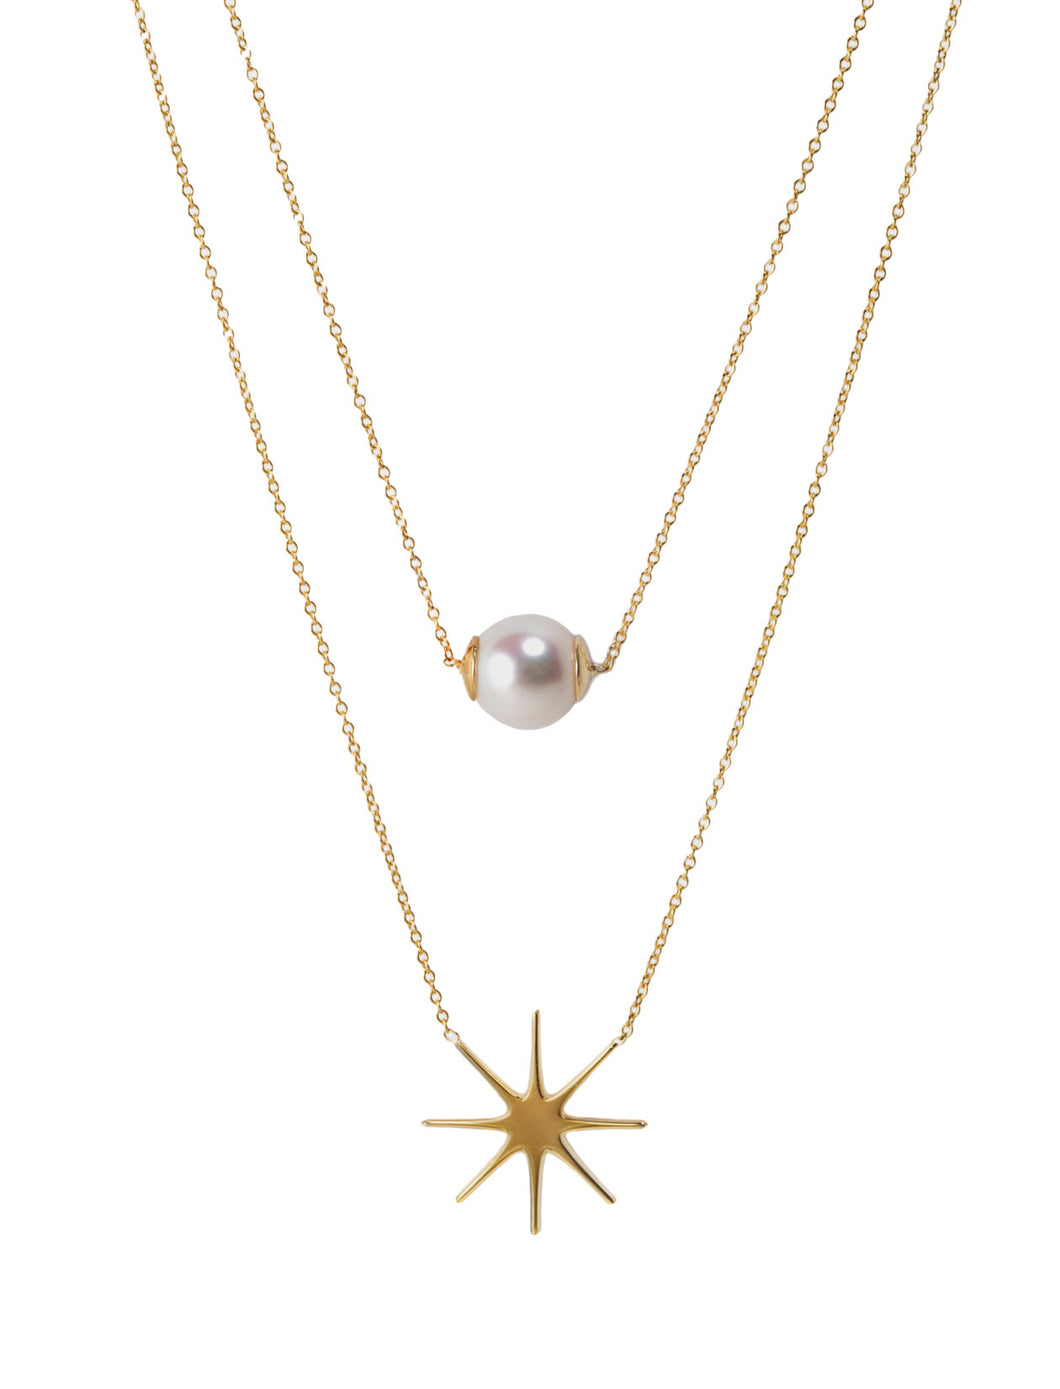 Spark and Pearl Layering | Kacey K Jewelry.